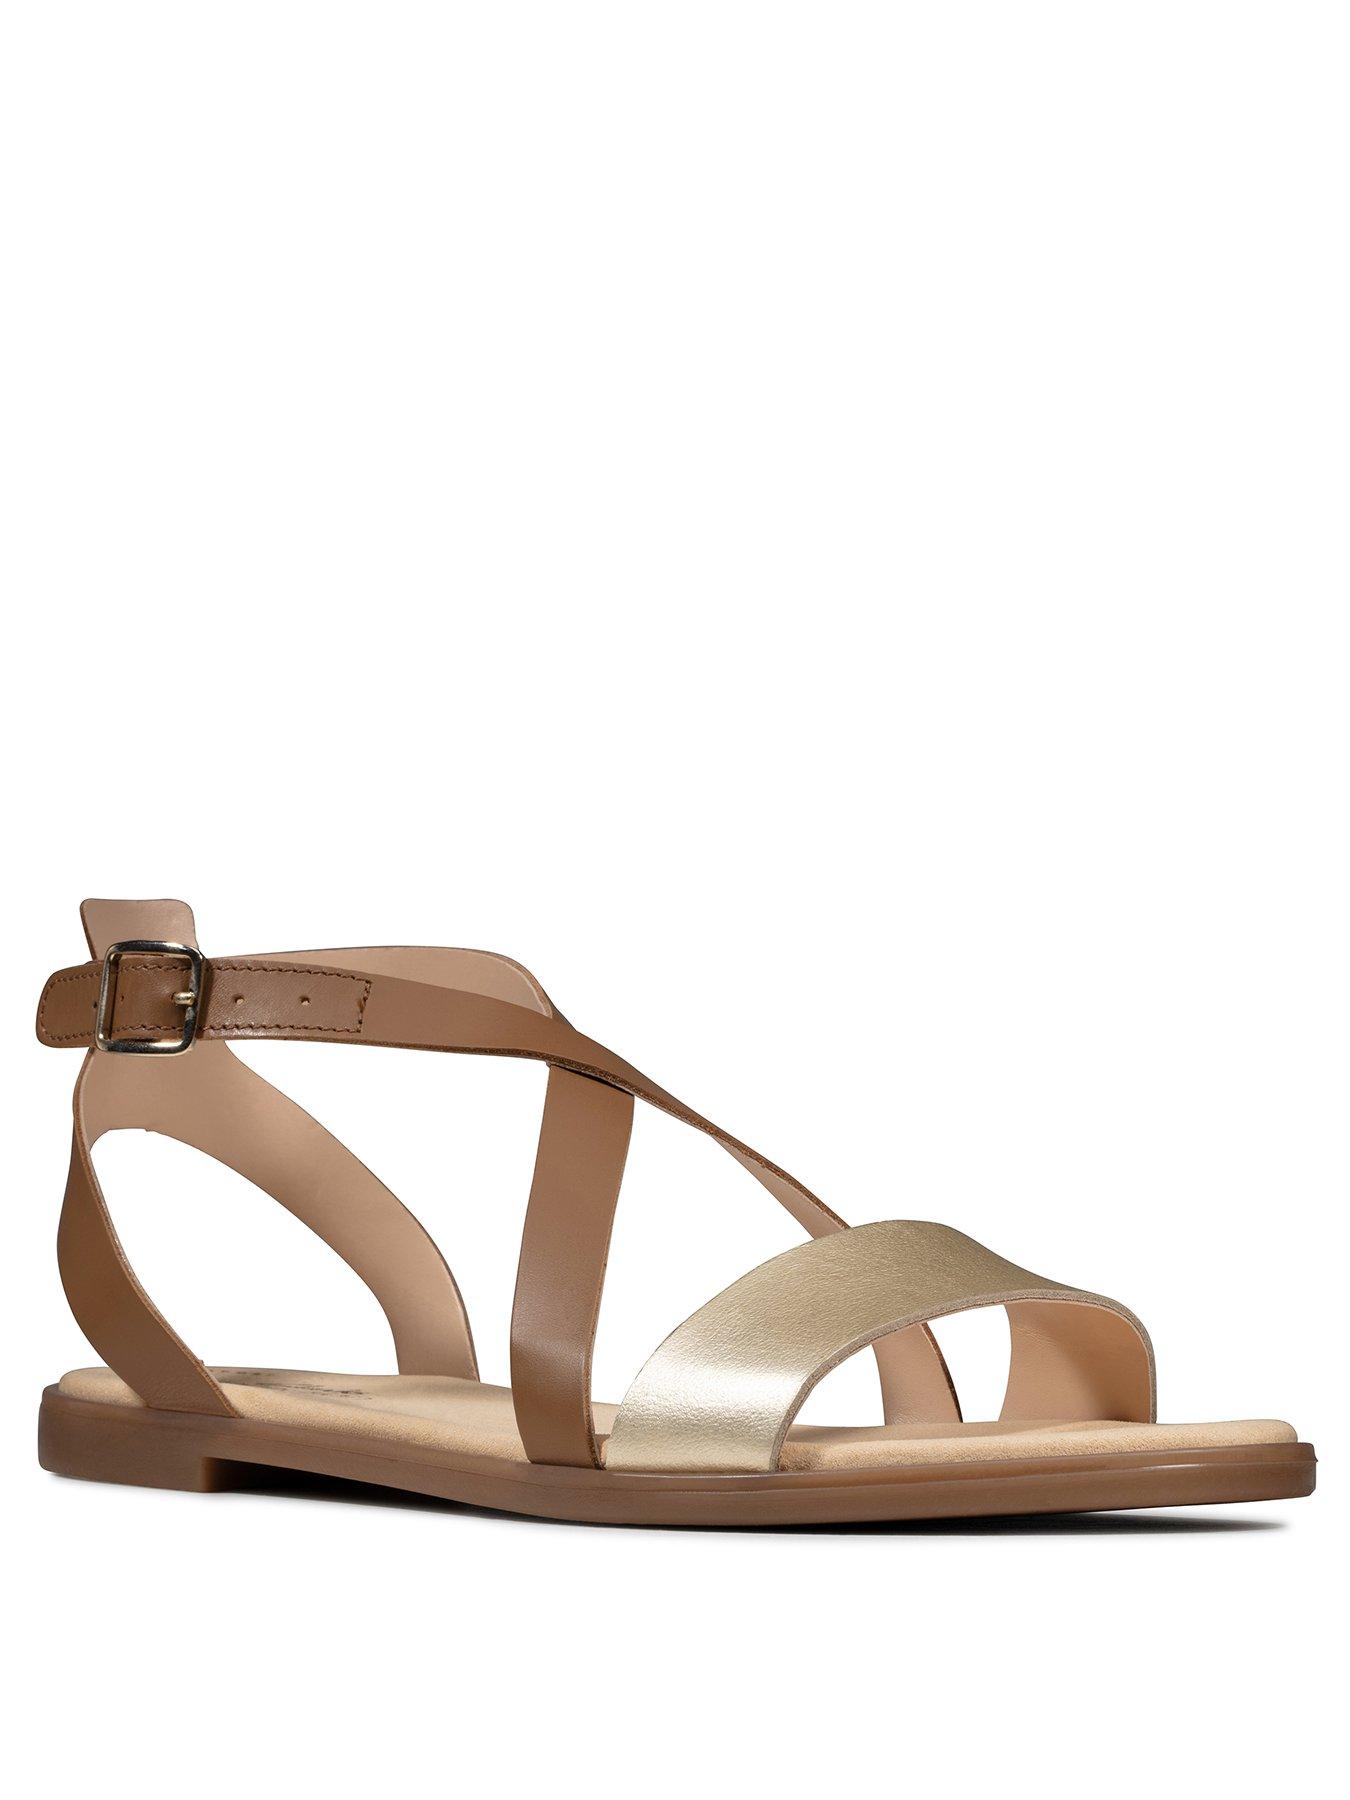 clarks tan leather sandals